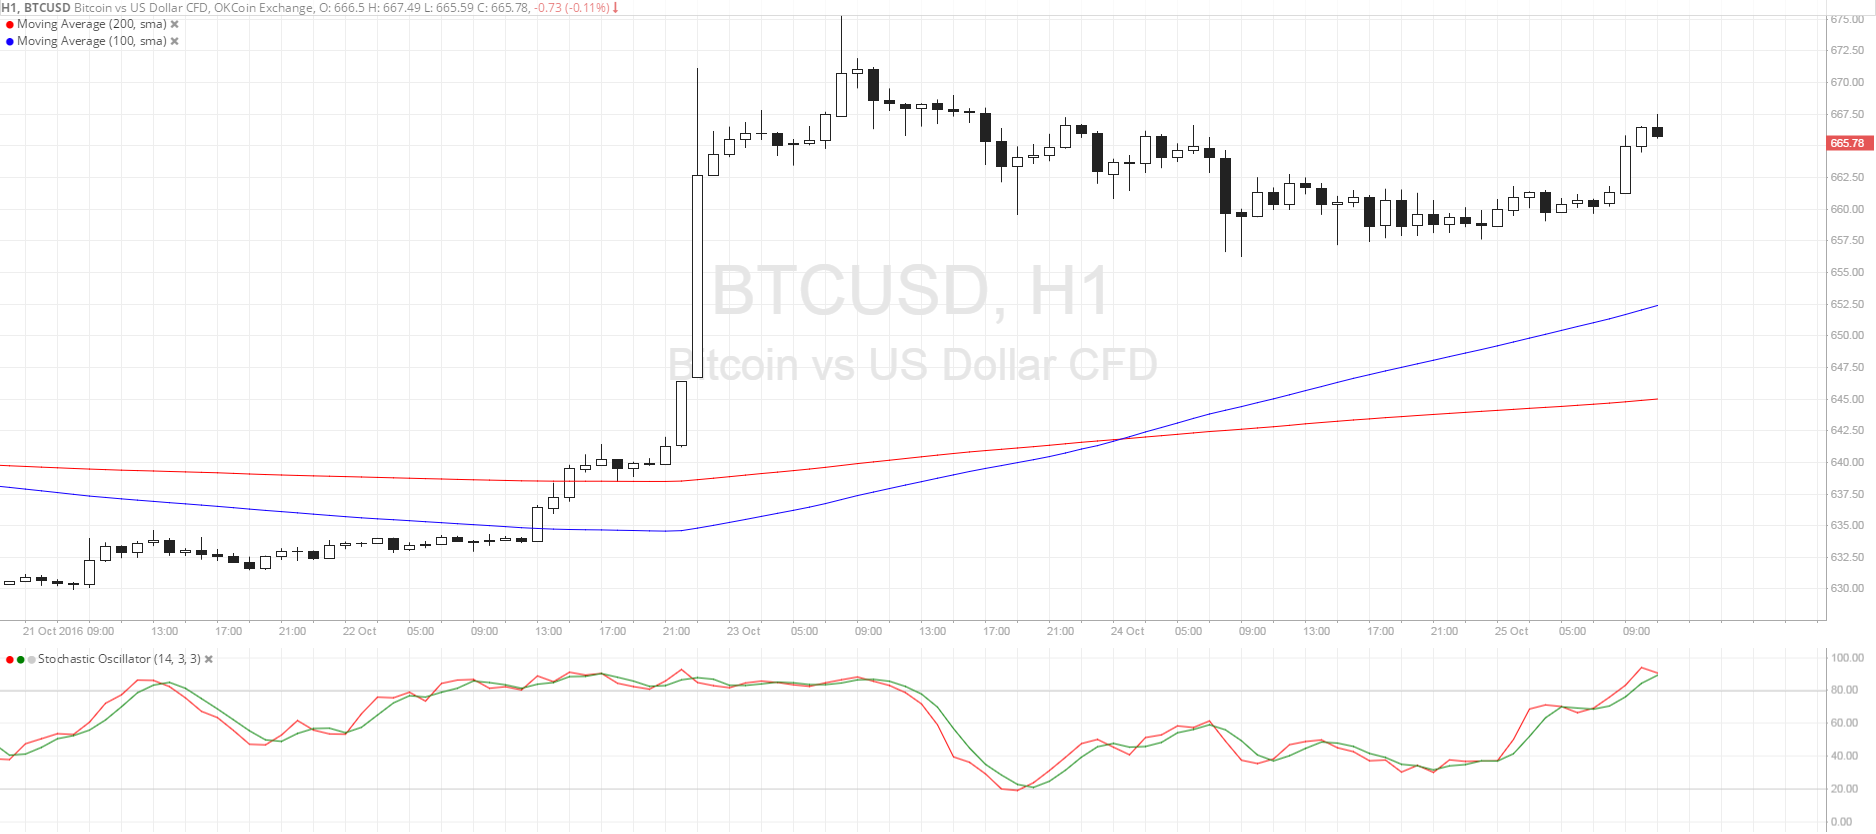 Bitcoin Price Technical Analysis for 10/25/2016 - Bulls Back in Action!